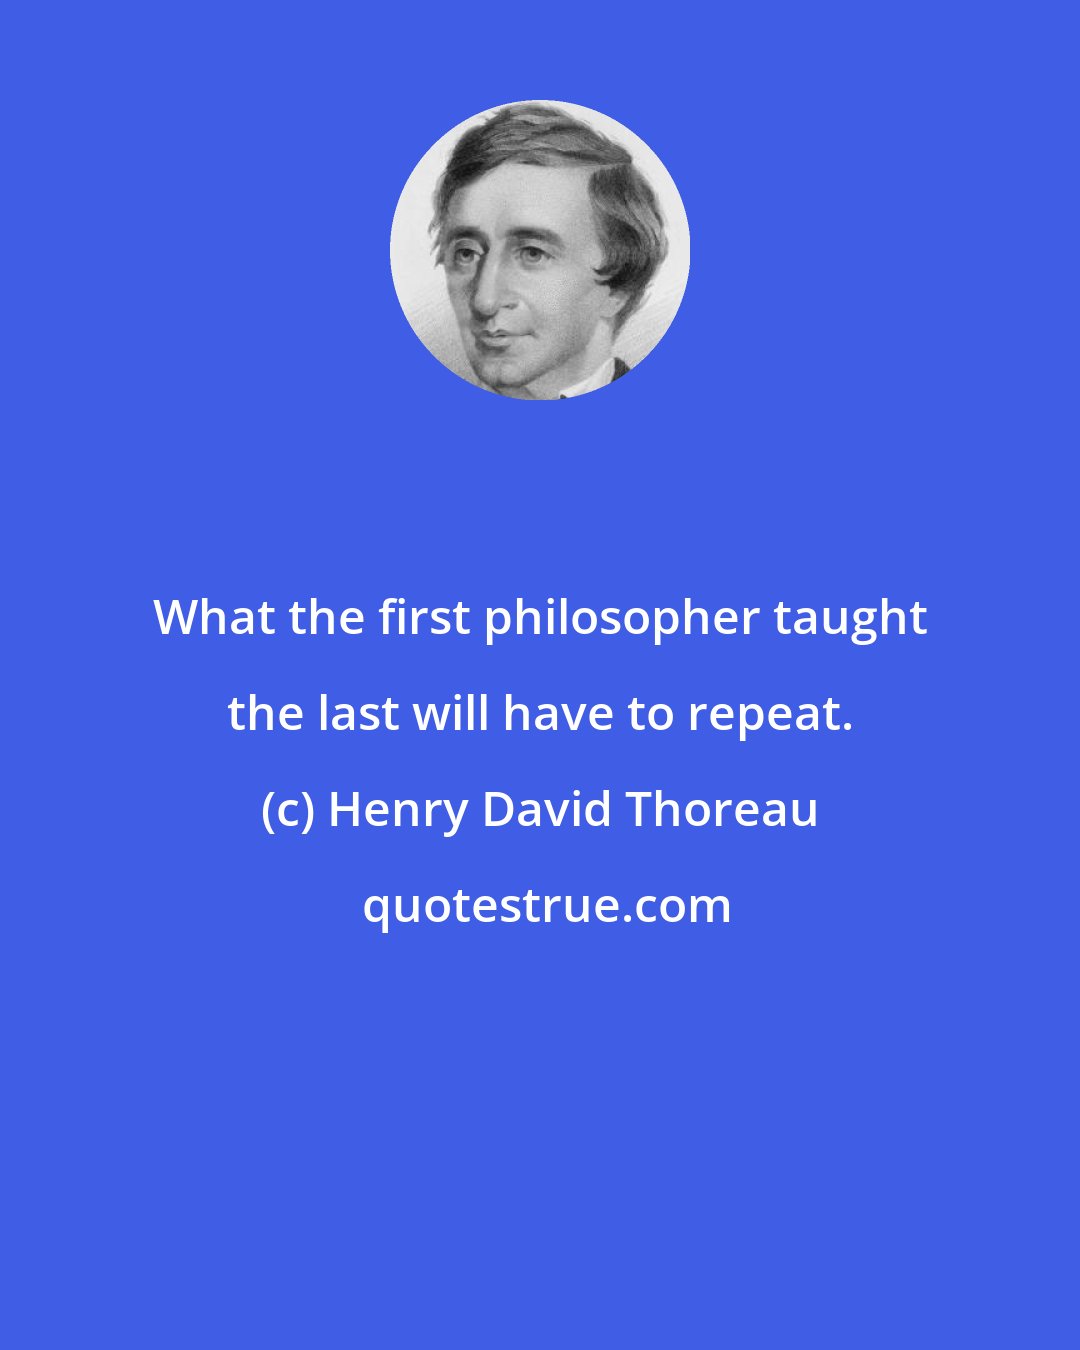 Henry David Thoreau: What the first philosopher taught the last will have to repeat.